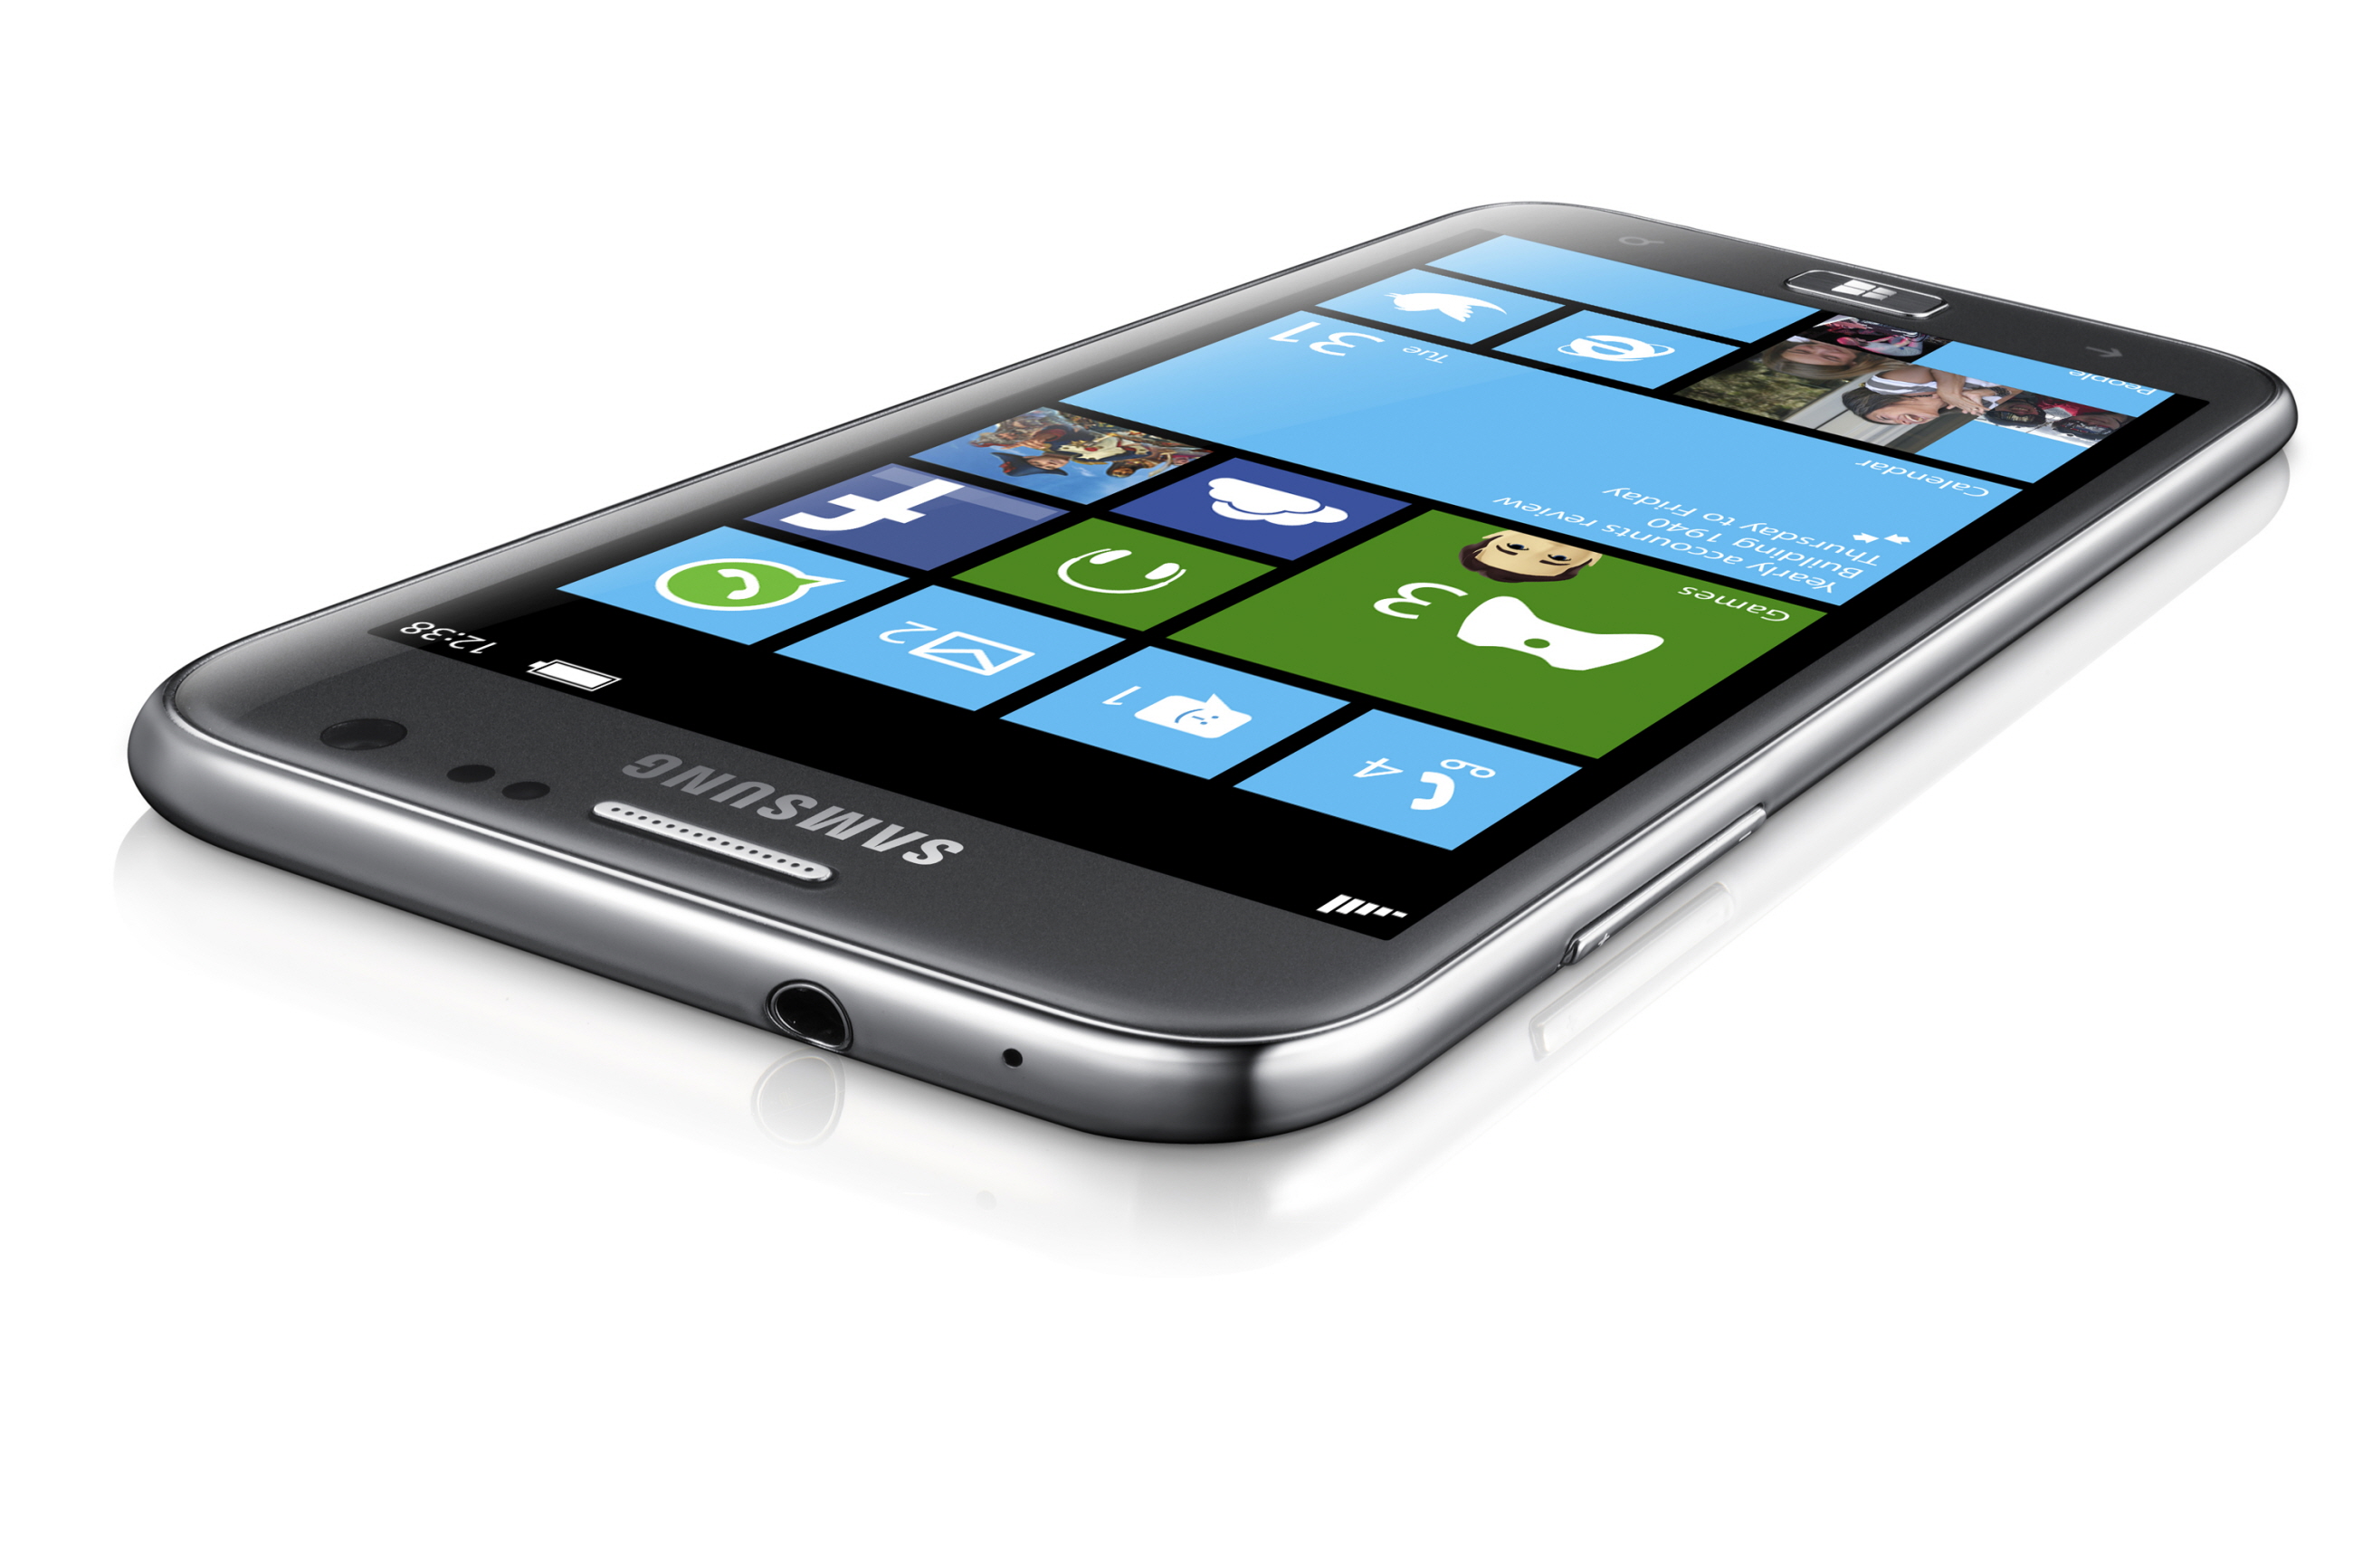 ATIV_S_Product_Image_Front_5.jpg